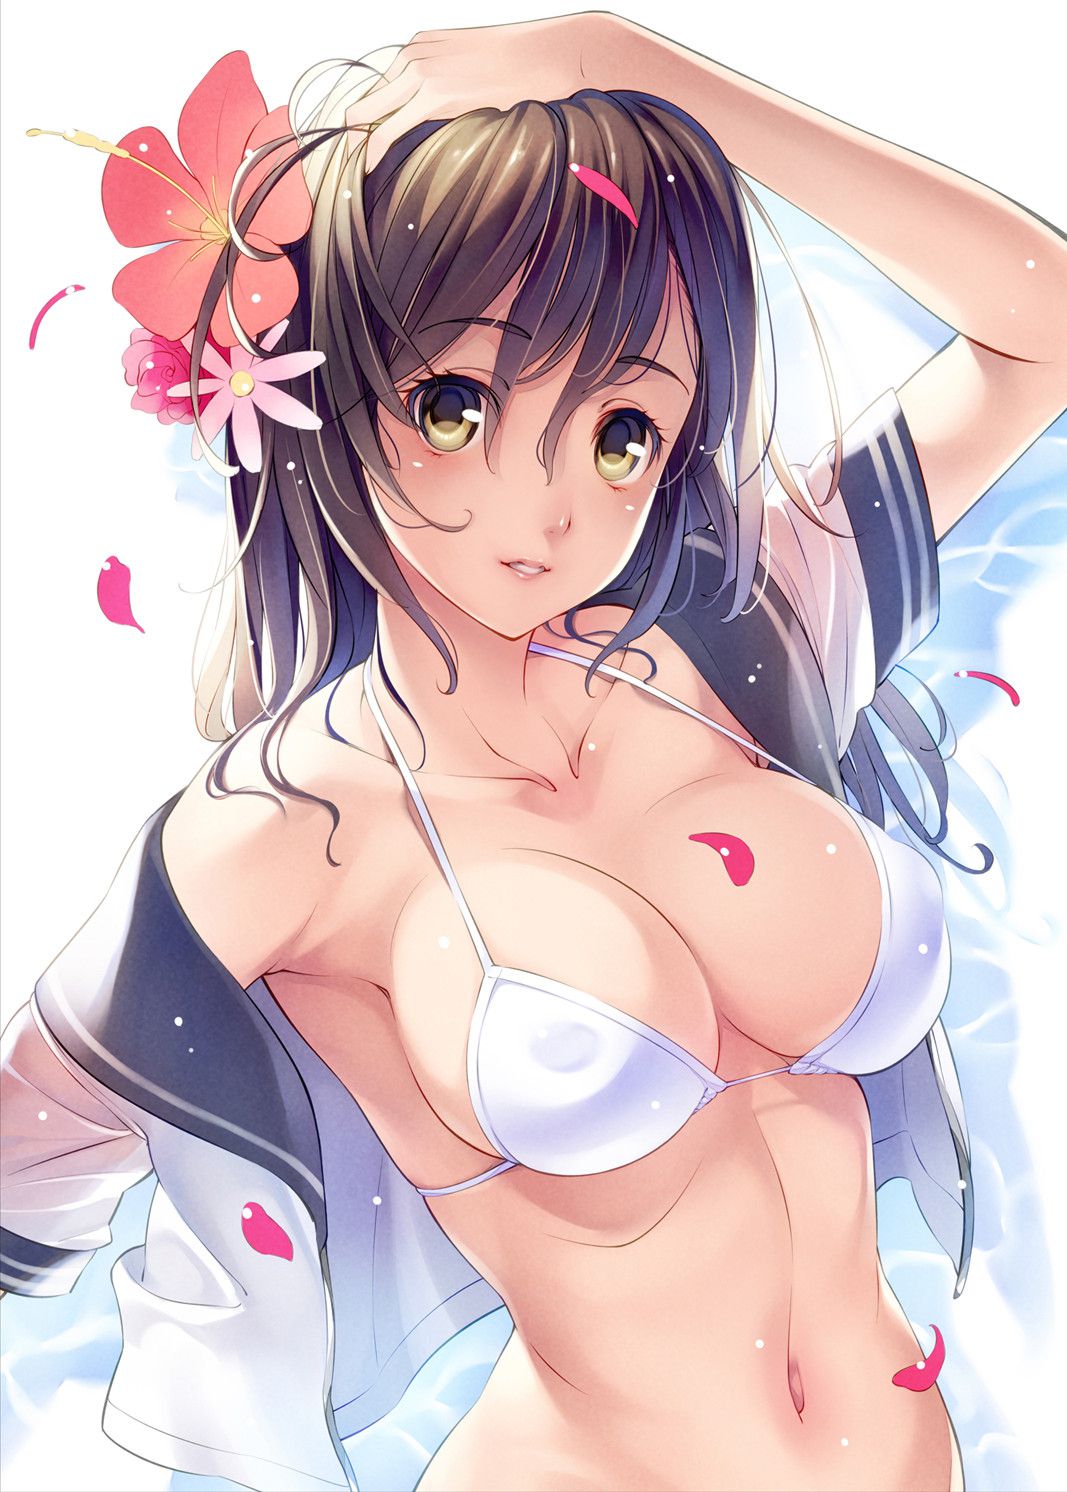 The swimsuit that wants to see the image of a swimsuit is lewd. That cloth area 2